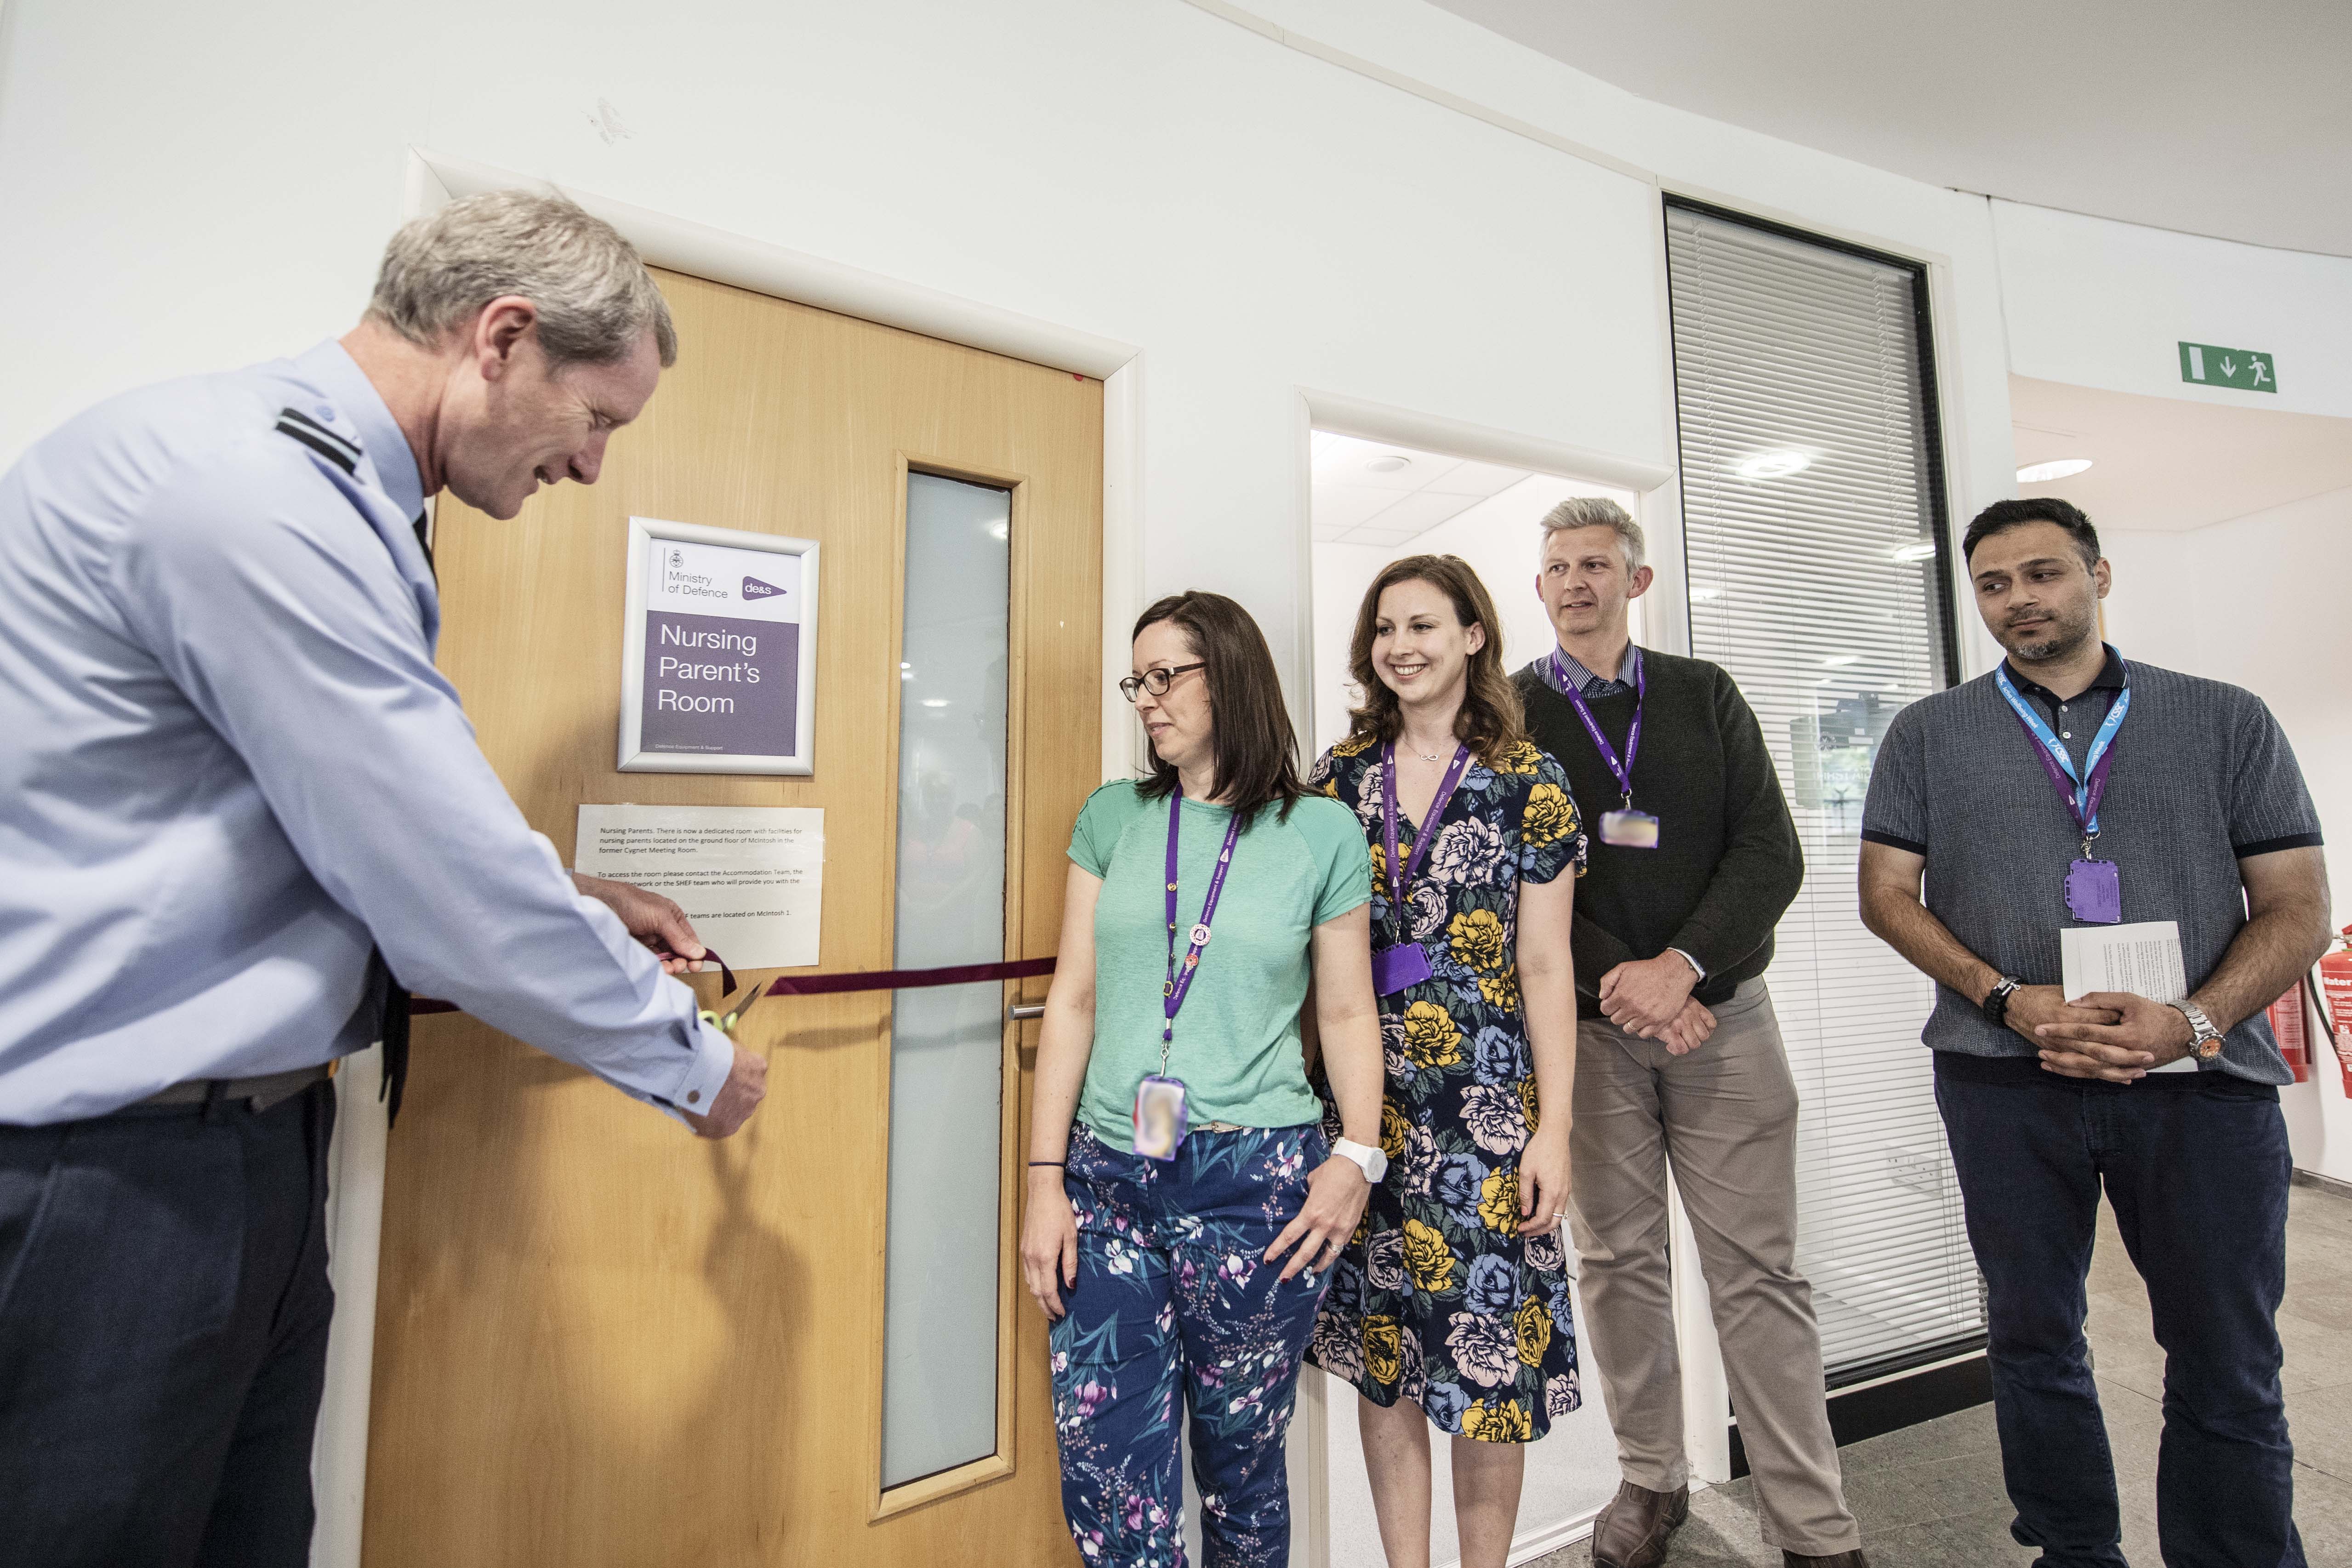 A man cuts a ribbon to open a new room in an office while a group watches on